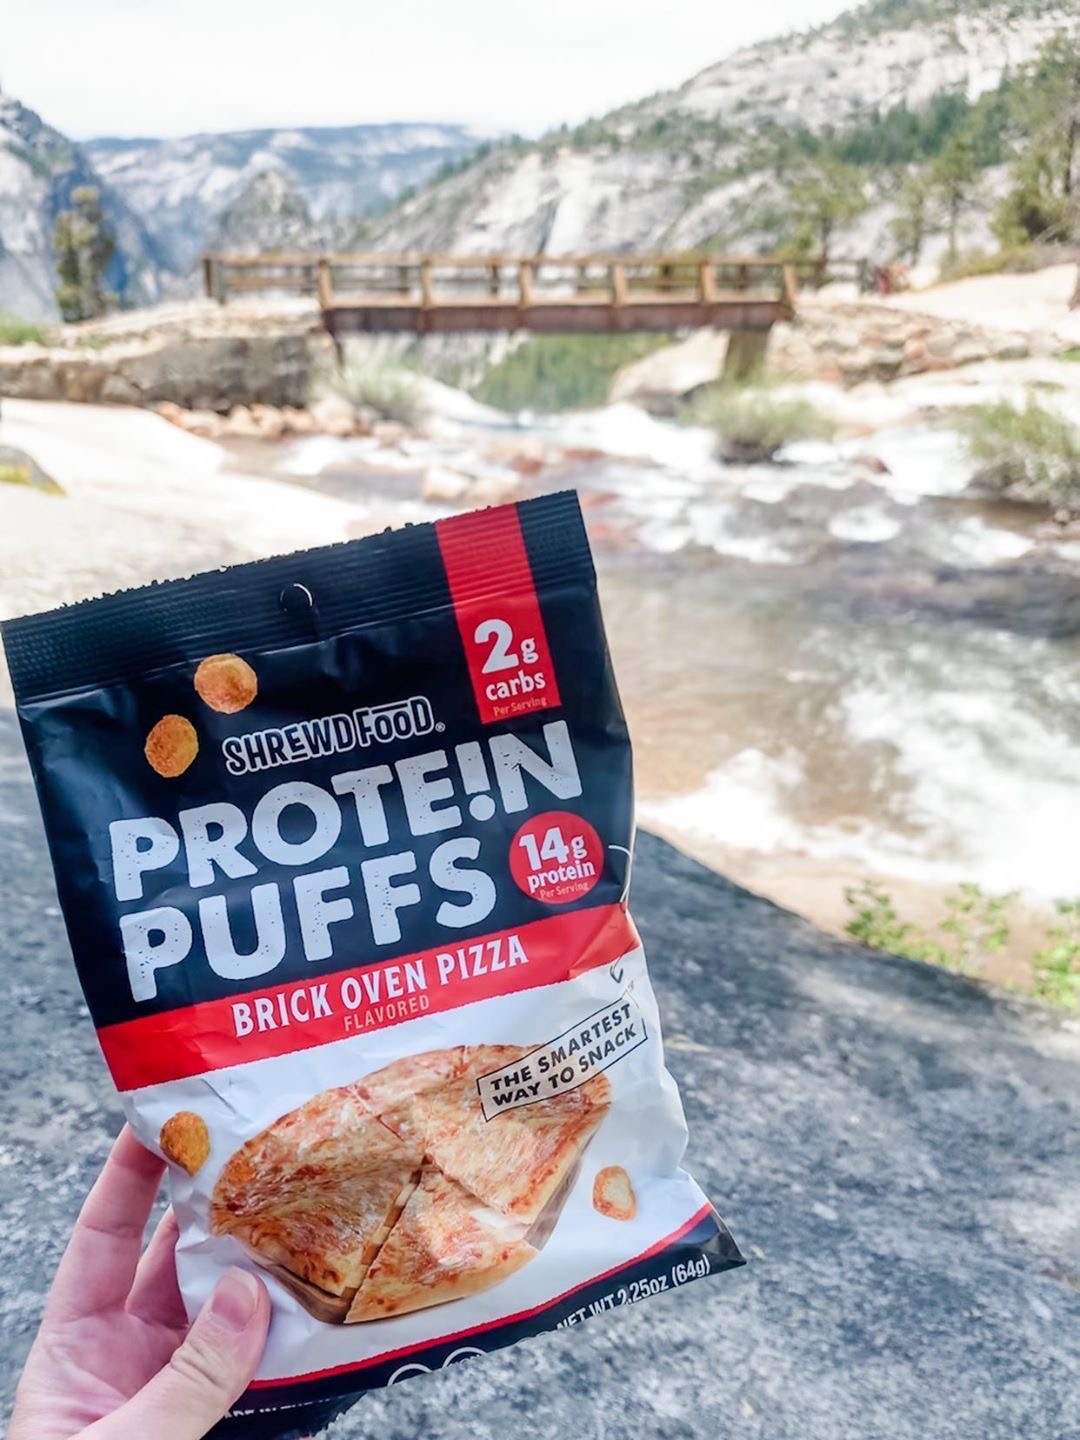 Package of shrewd food puffs in flavor brick oven pizza being held up by a river and mountains